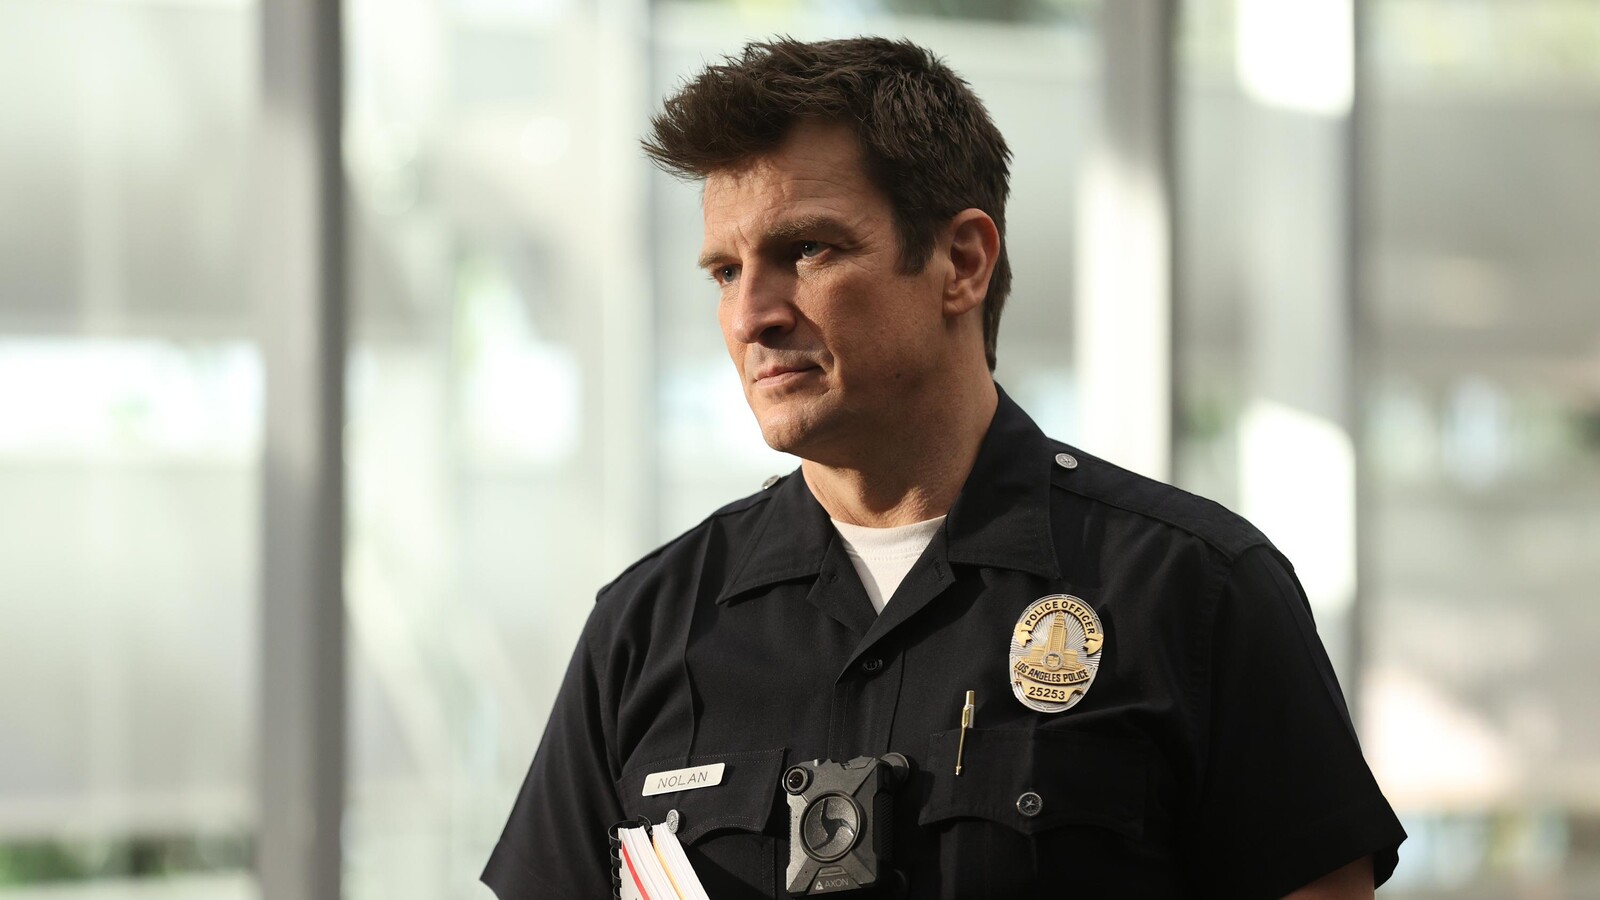 The Rookie' Picked Up for Full Season at ABC